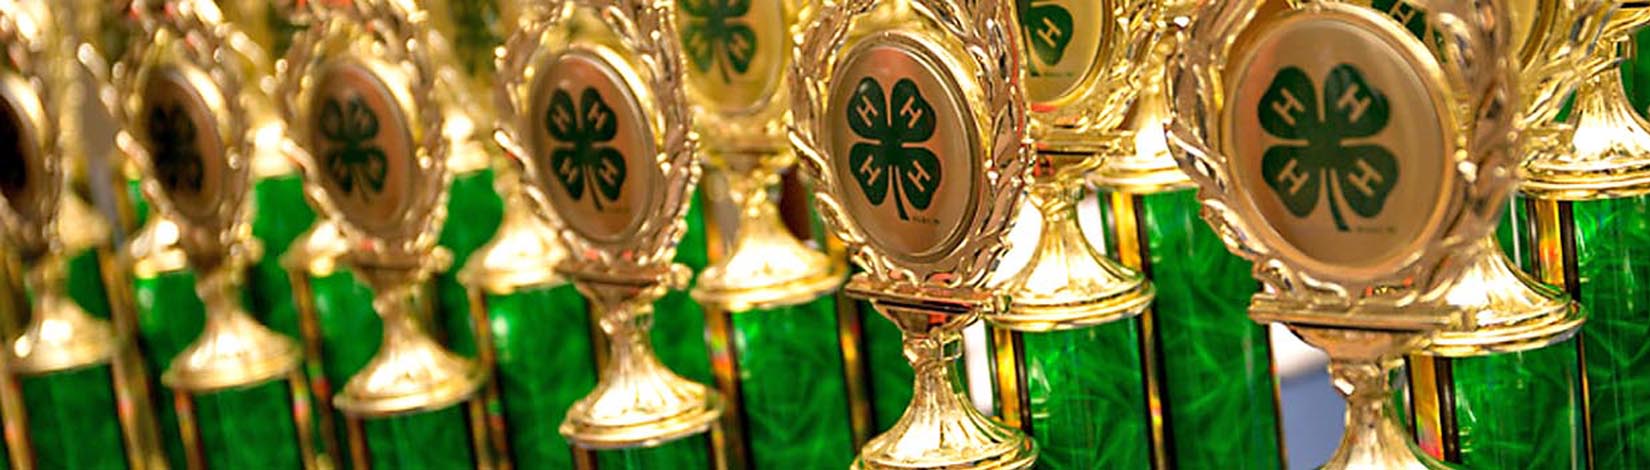 4-H trophies lined up on a table